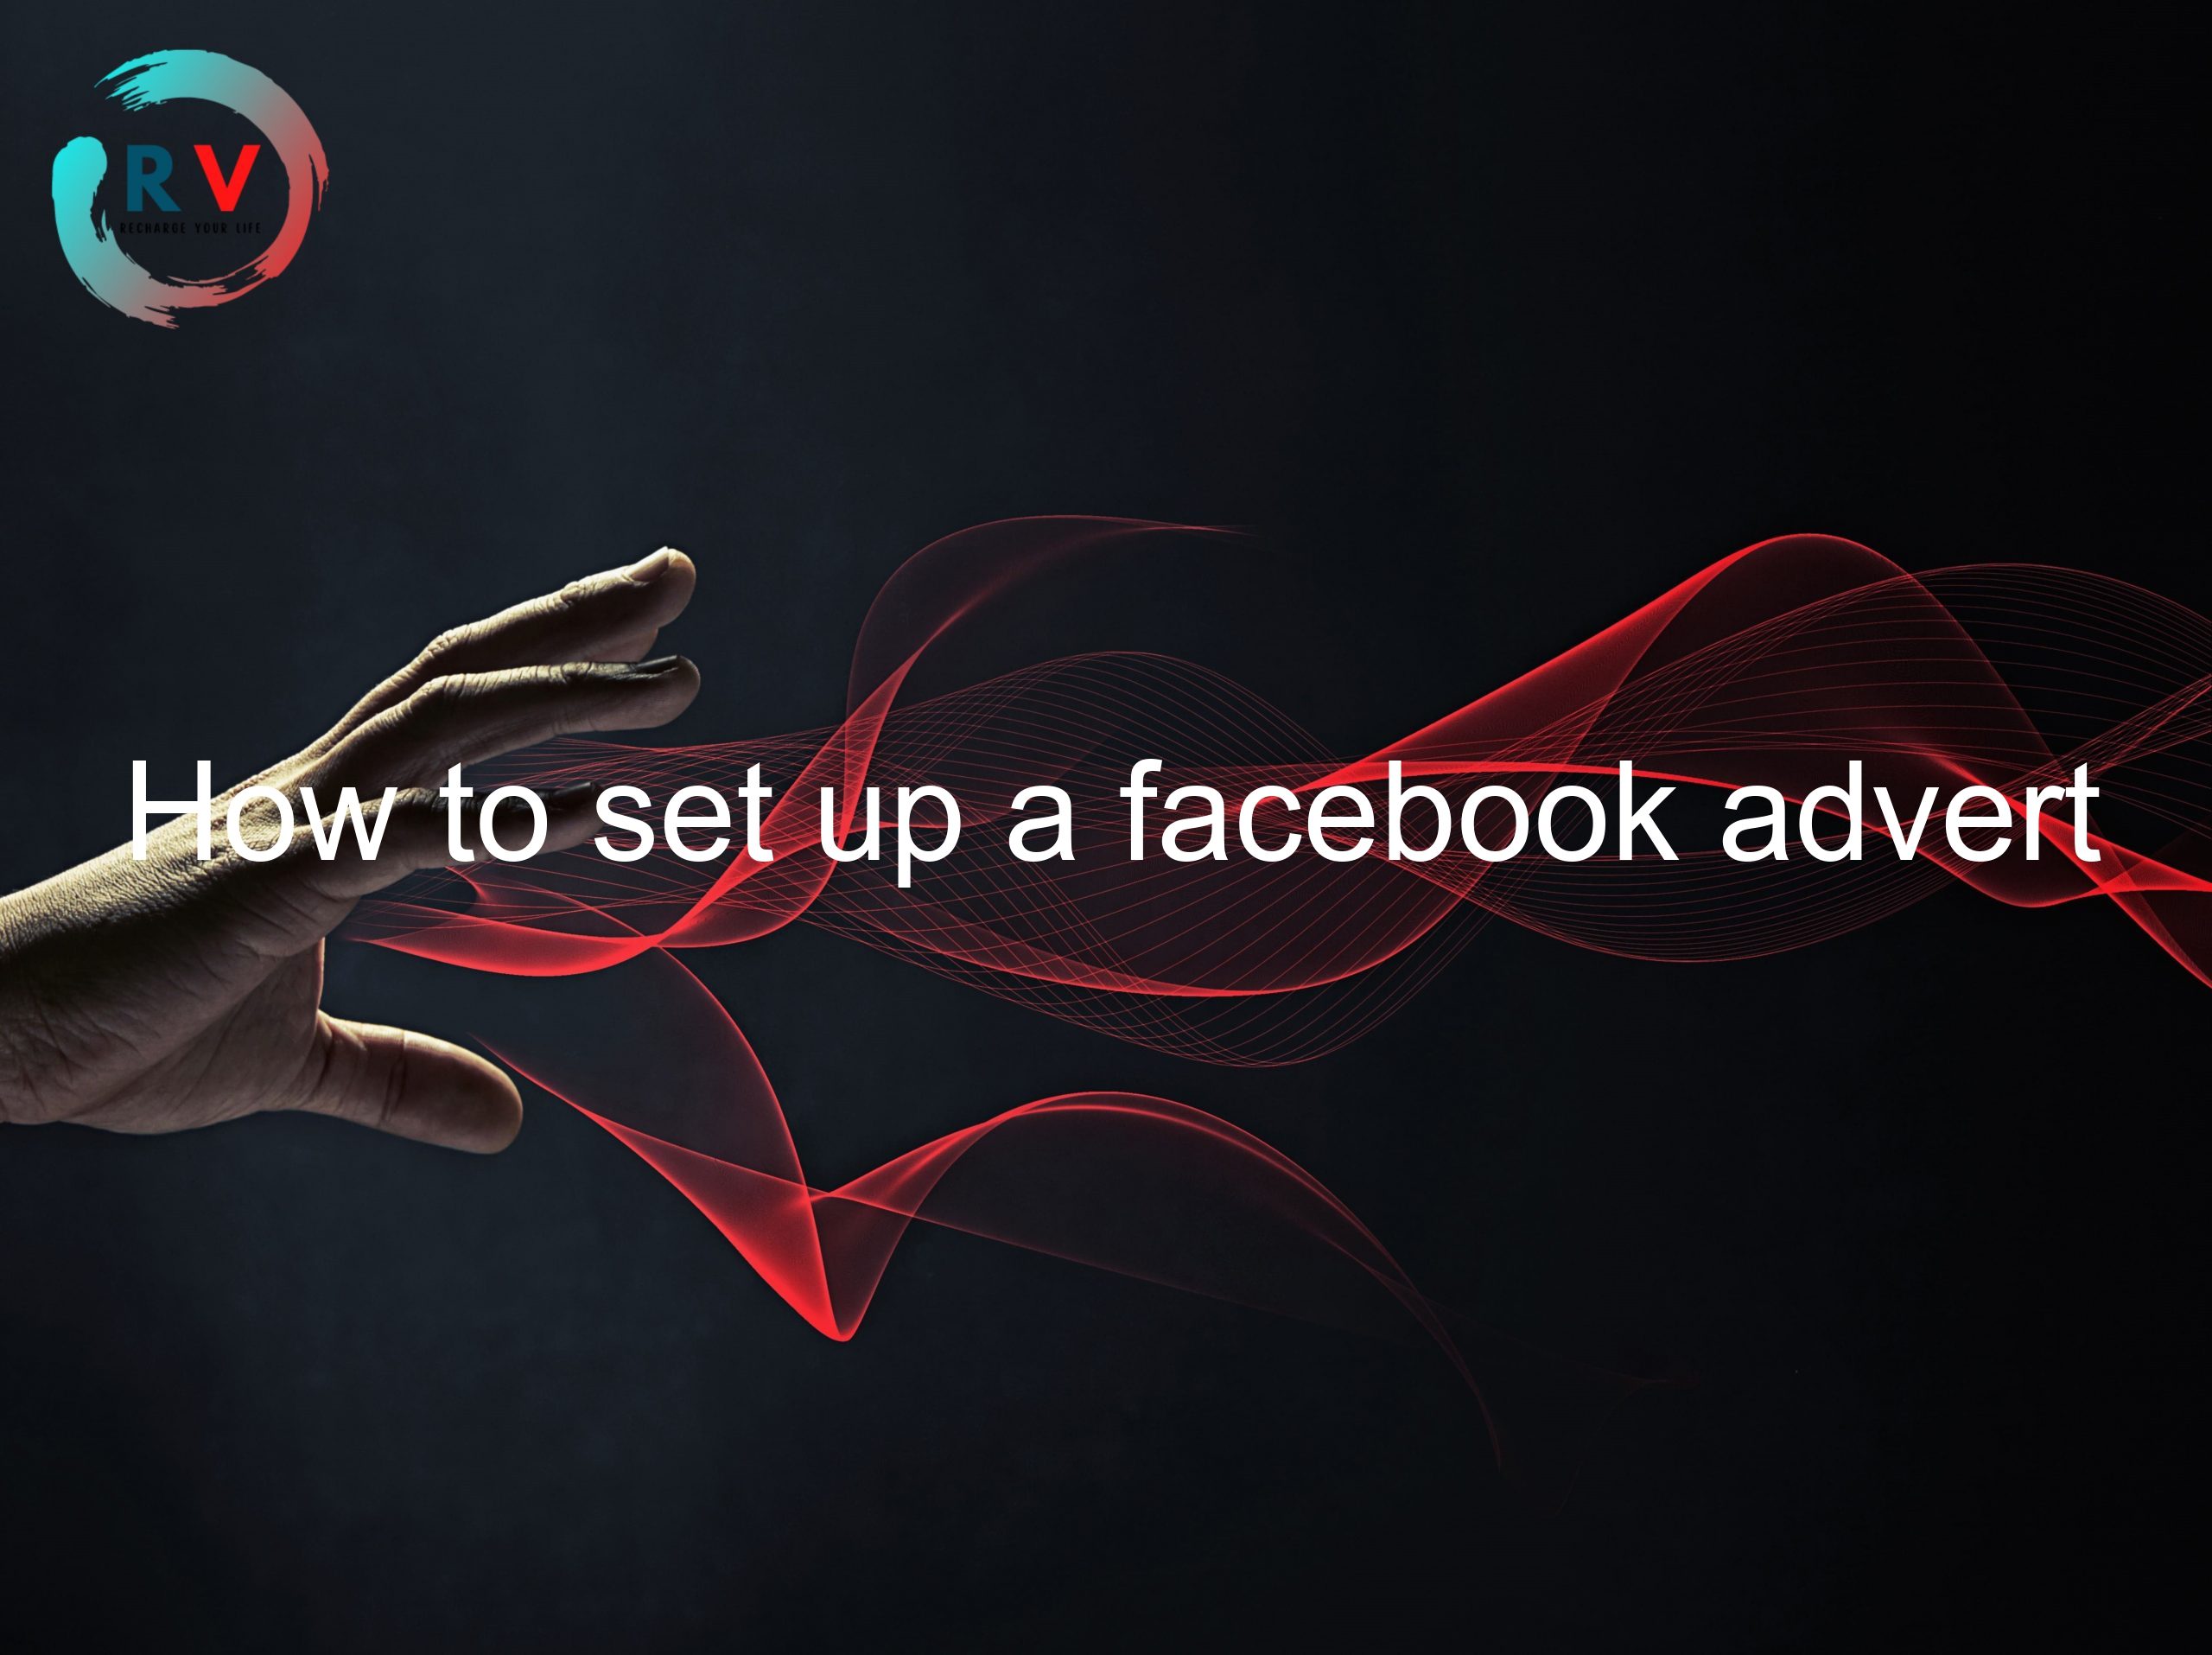 How to set up a facebook advert